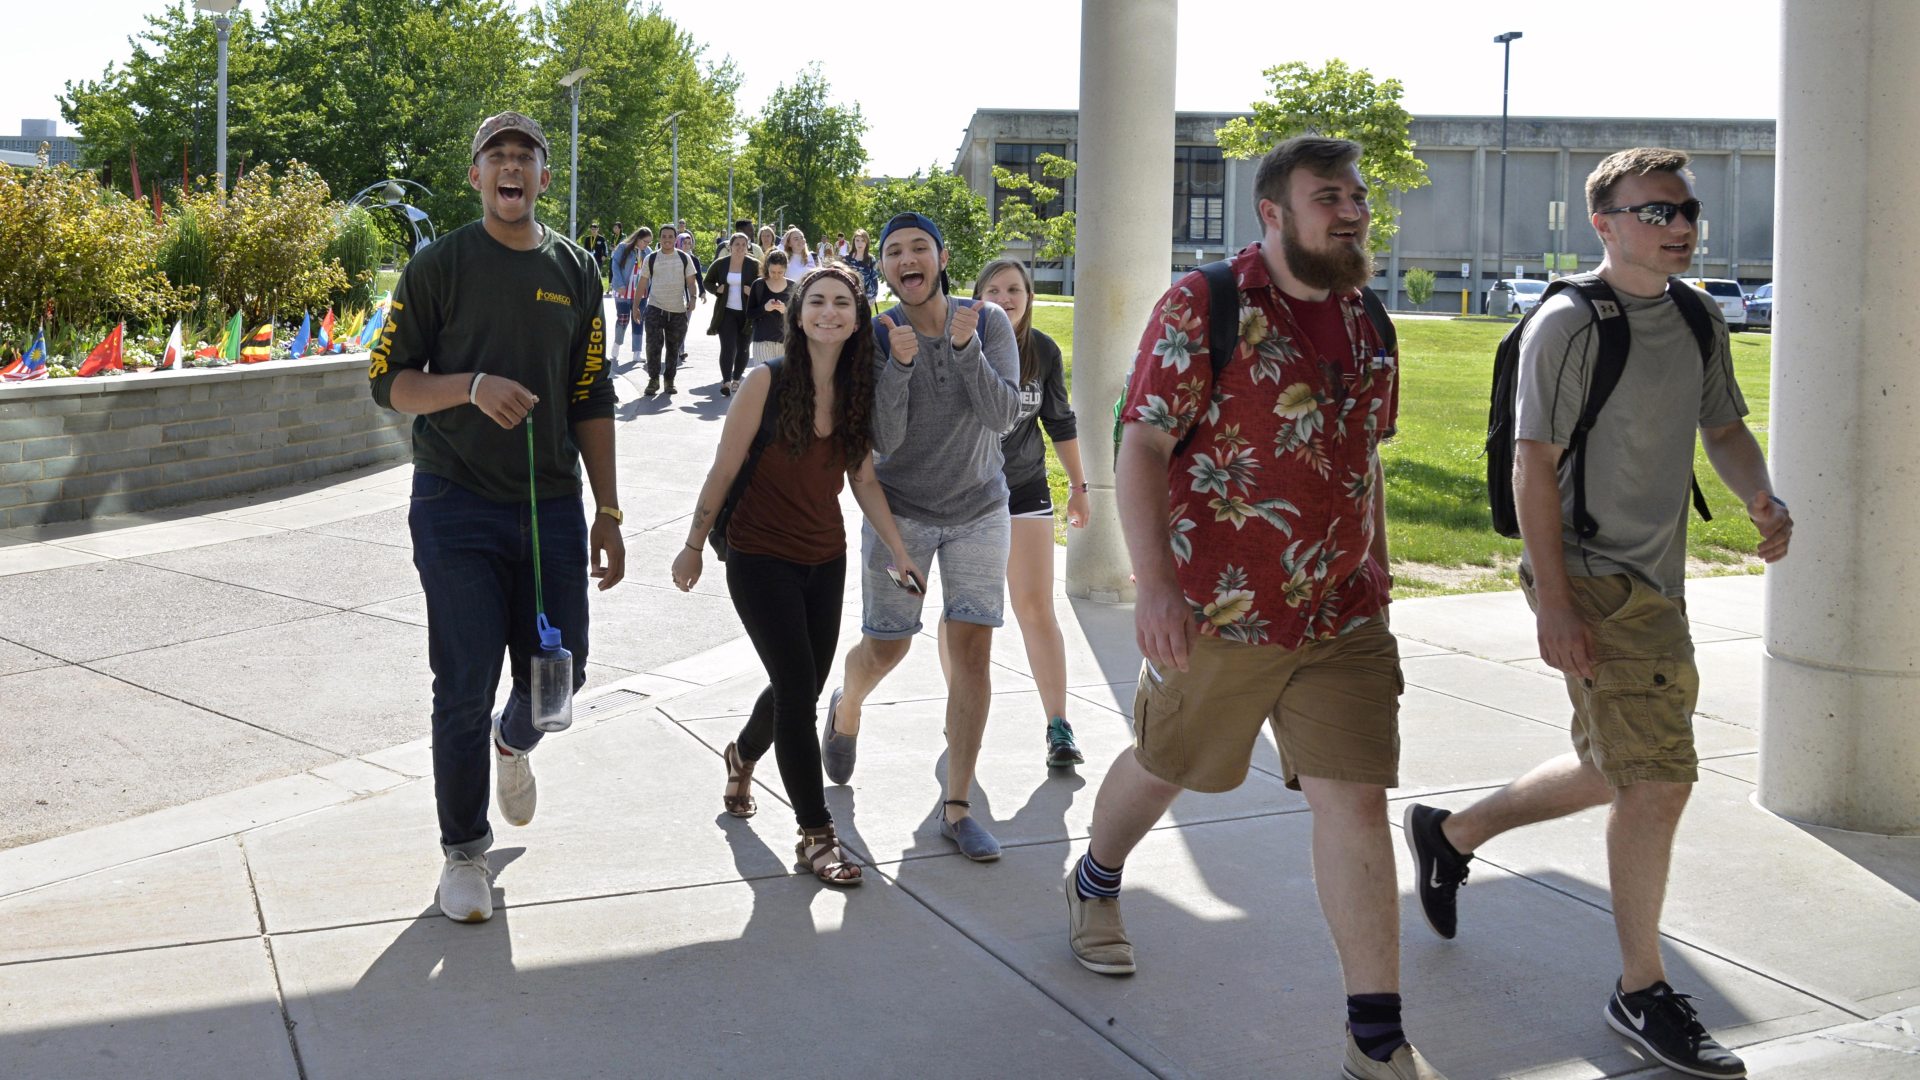 Laker Leaders walking into Marano Campus Center during Orientation on a bright and sunny day. They are looking towards the camera smiling.